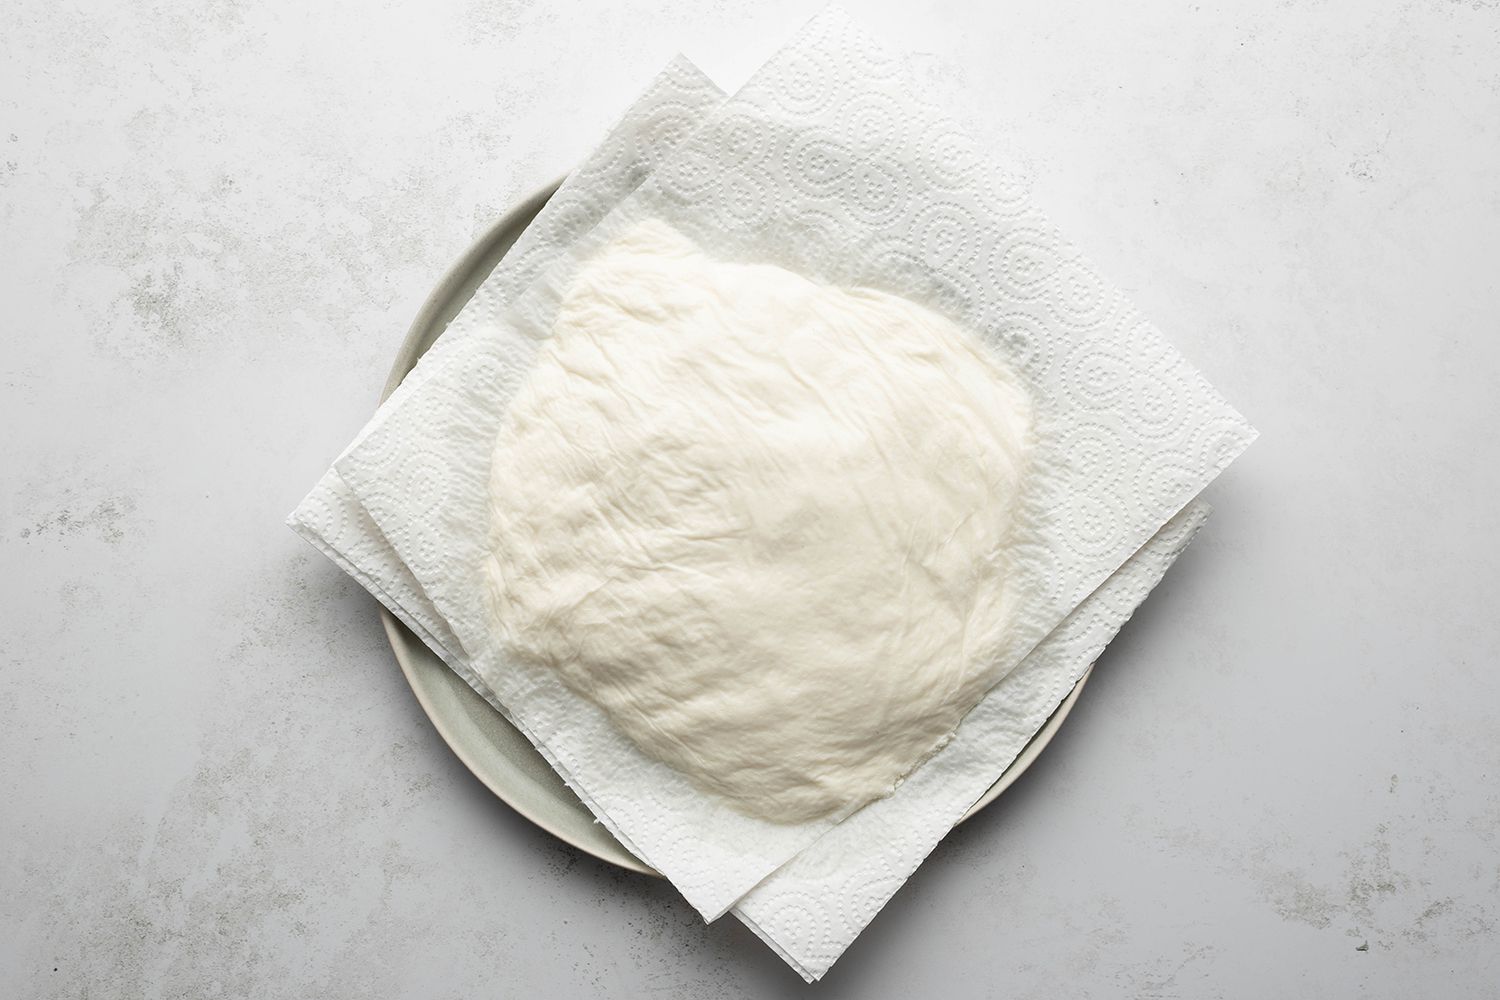 Ricotta cheese between paper towels on a plate 